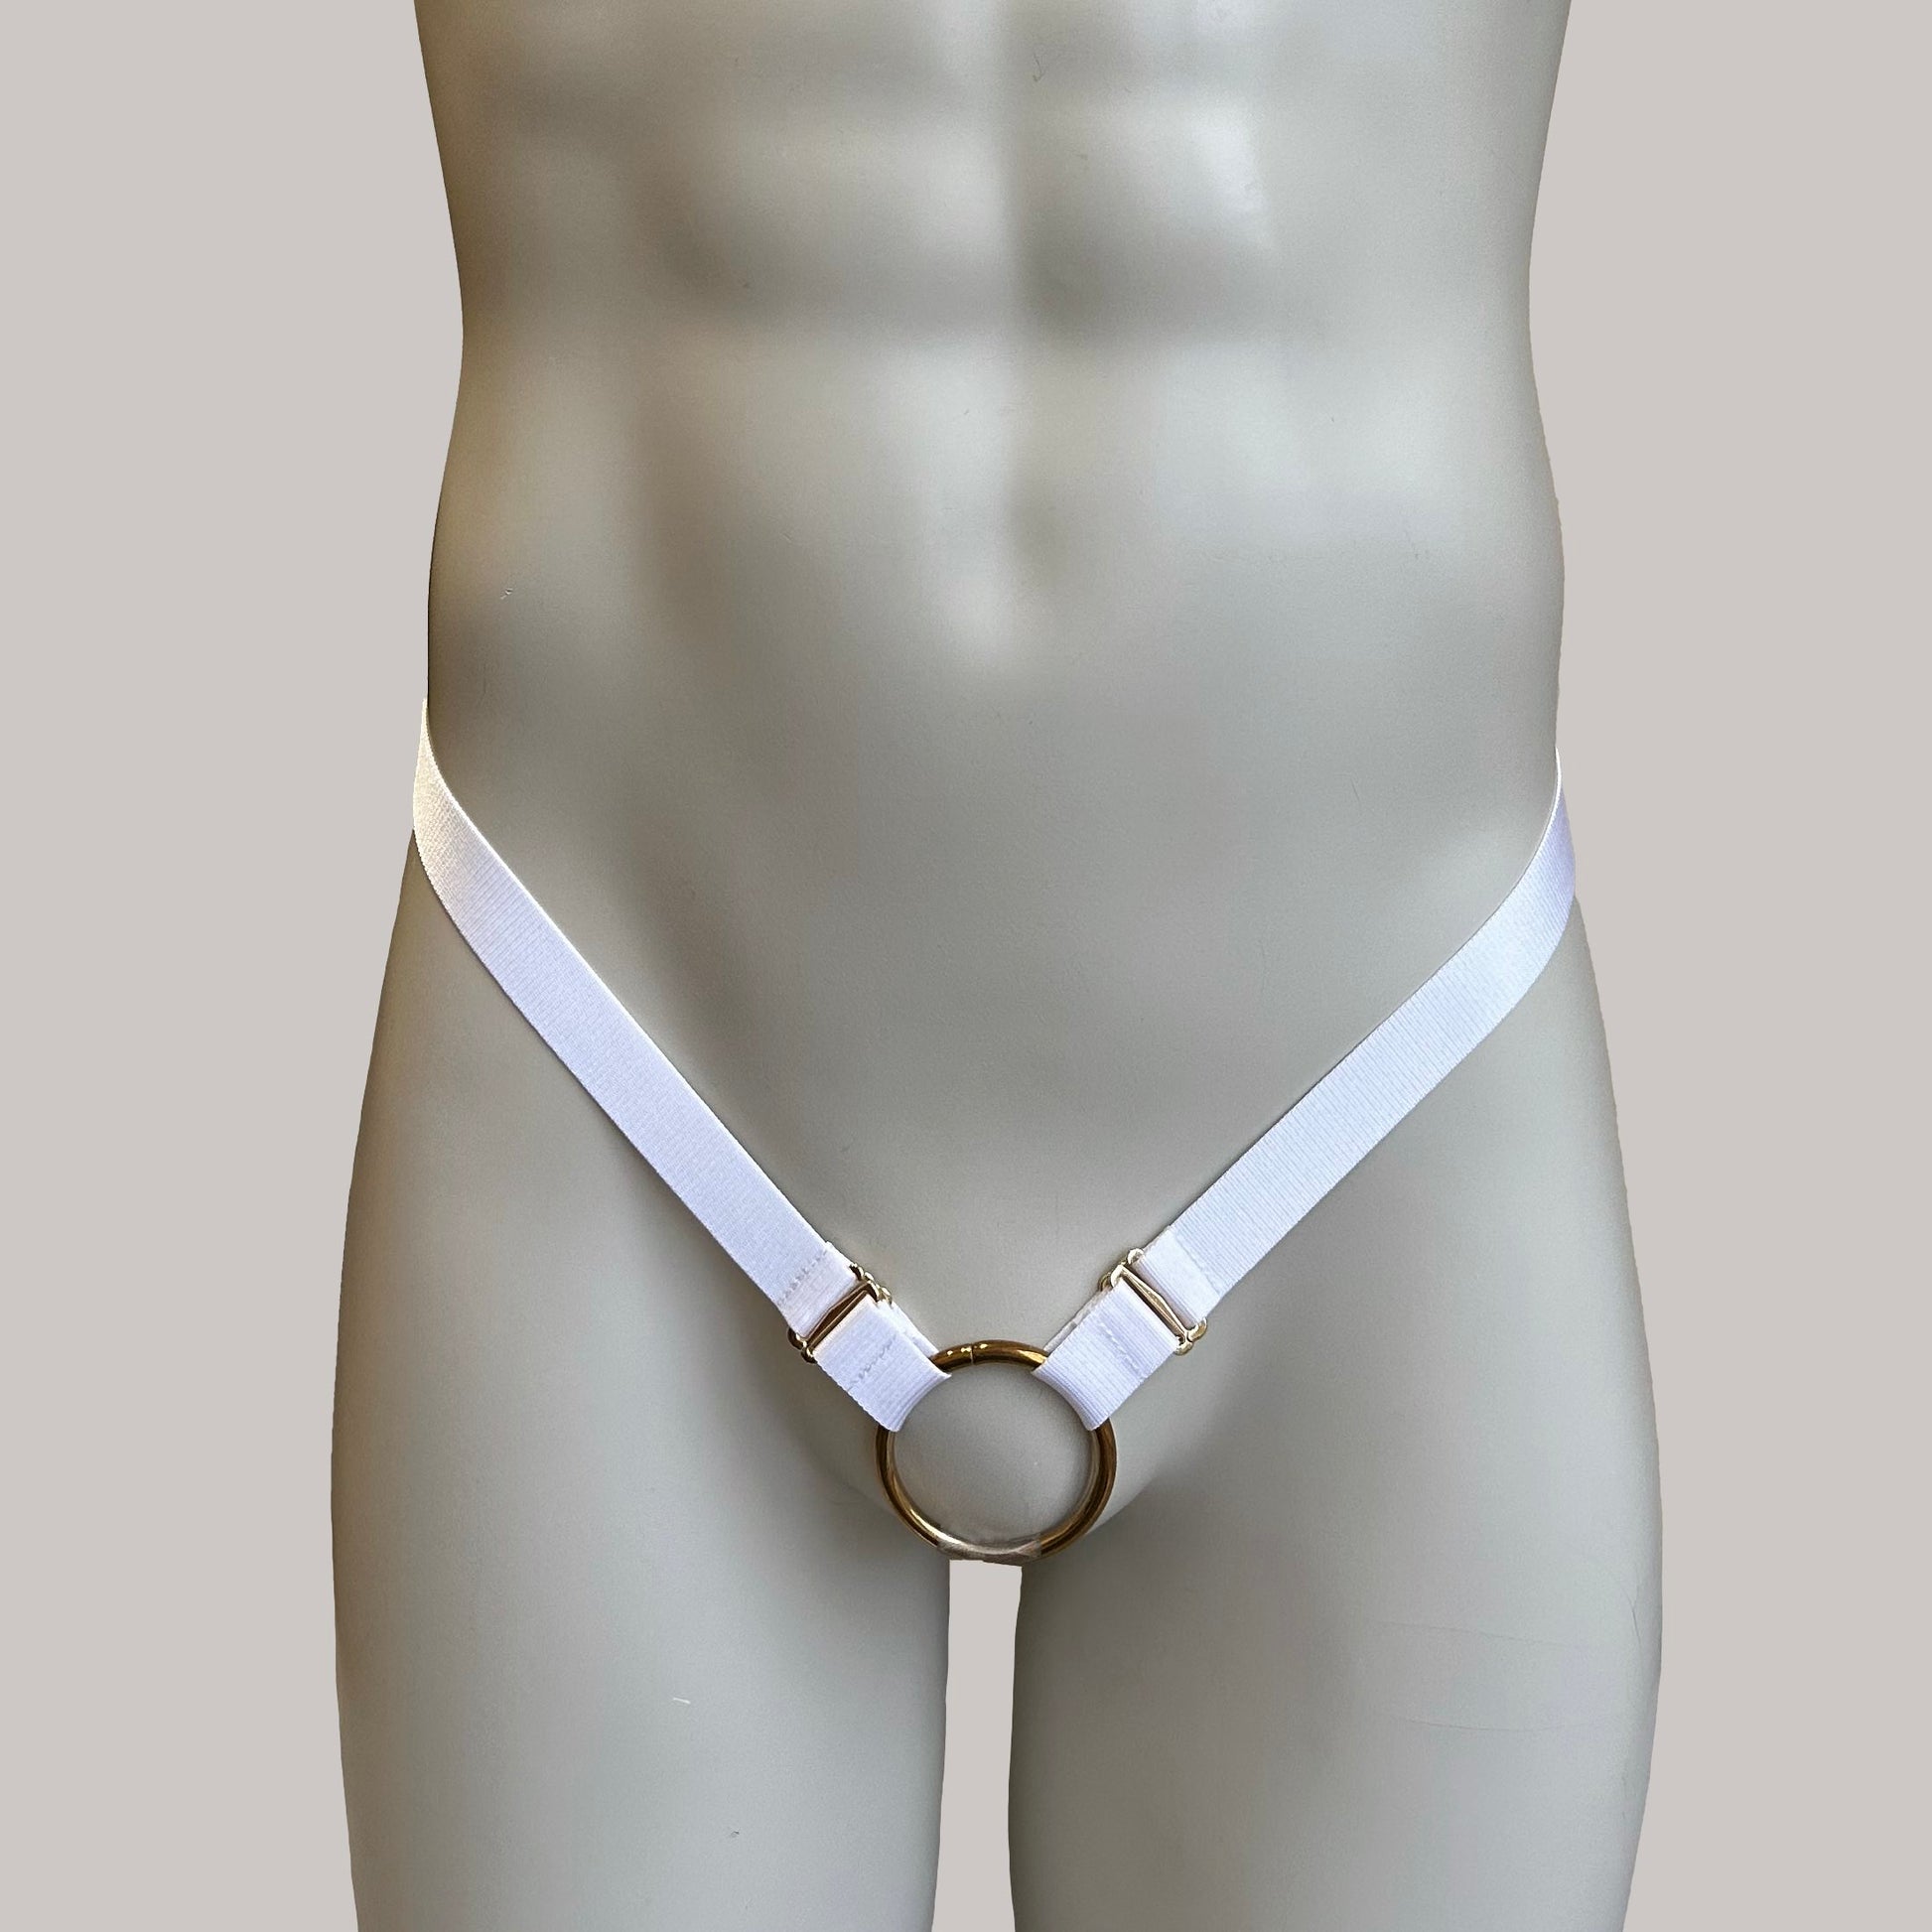 Chastity Cage Anti-falling Universal Waist Strap, White Two Strap Adjustable Elastic Belt